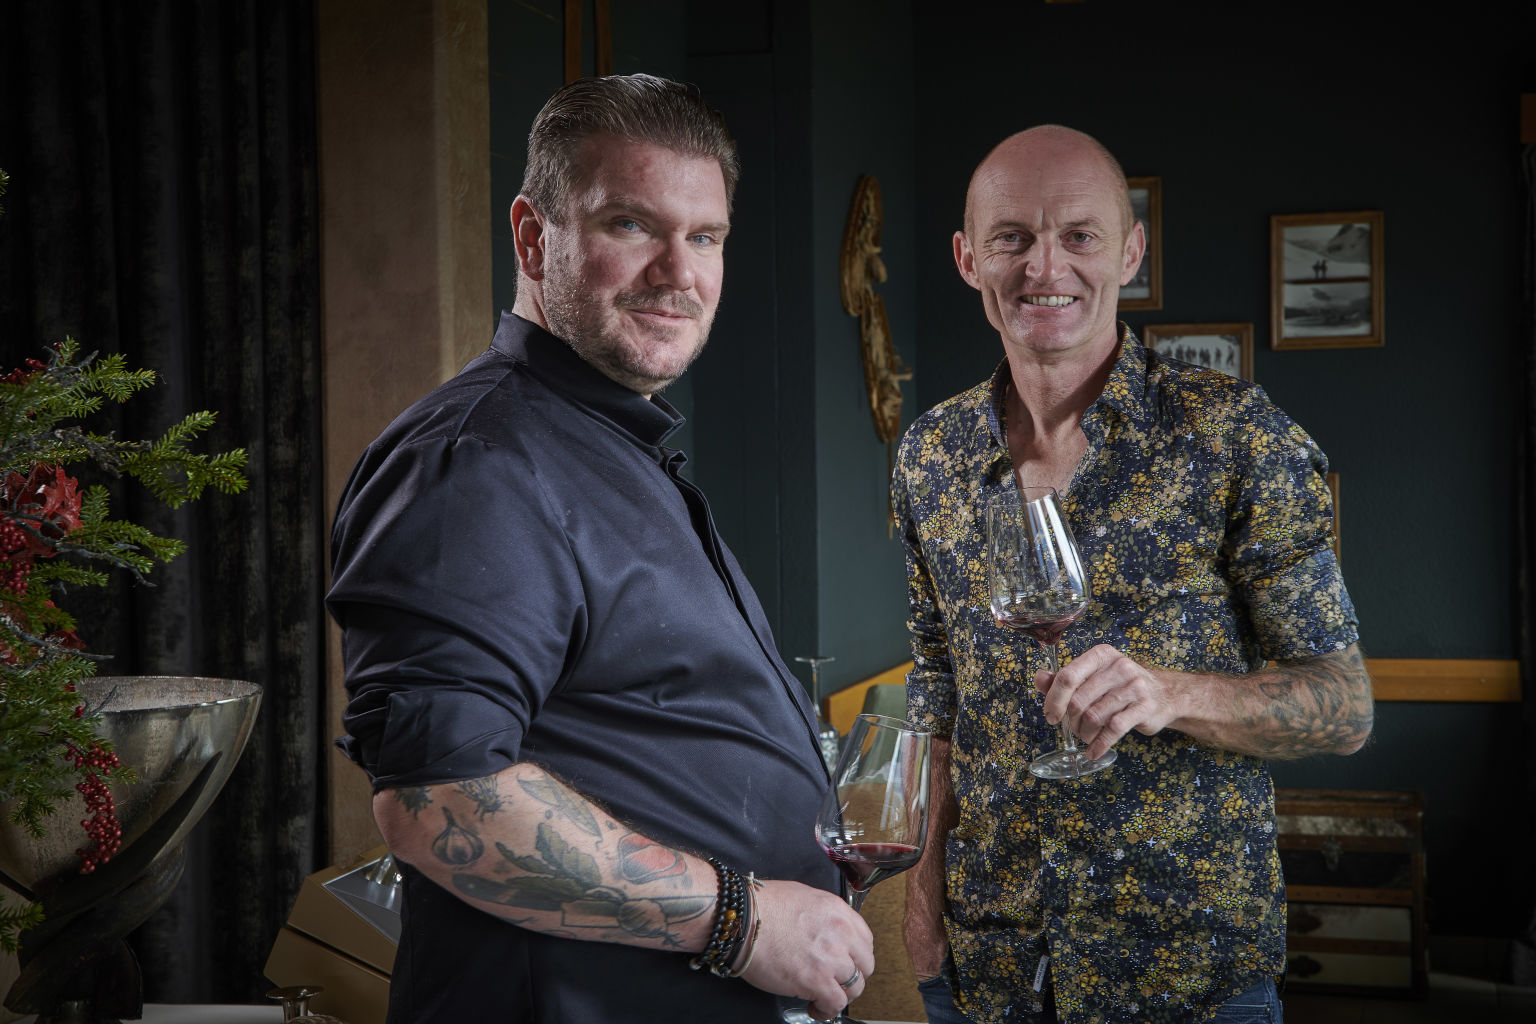 Bert De Rycker (left) and Thierry Constantin both enjoy fine food matched with the right wine – and they both love tattoos, too. Valais Switzerland